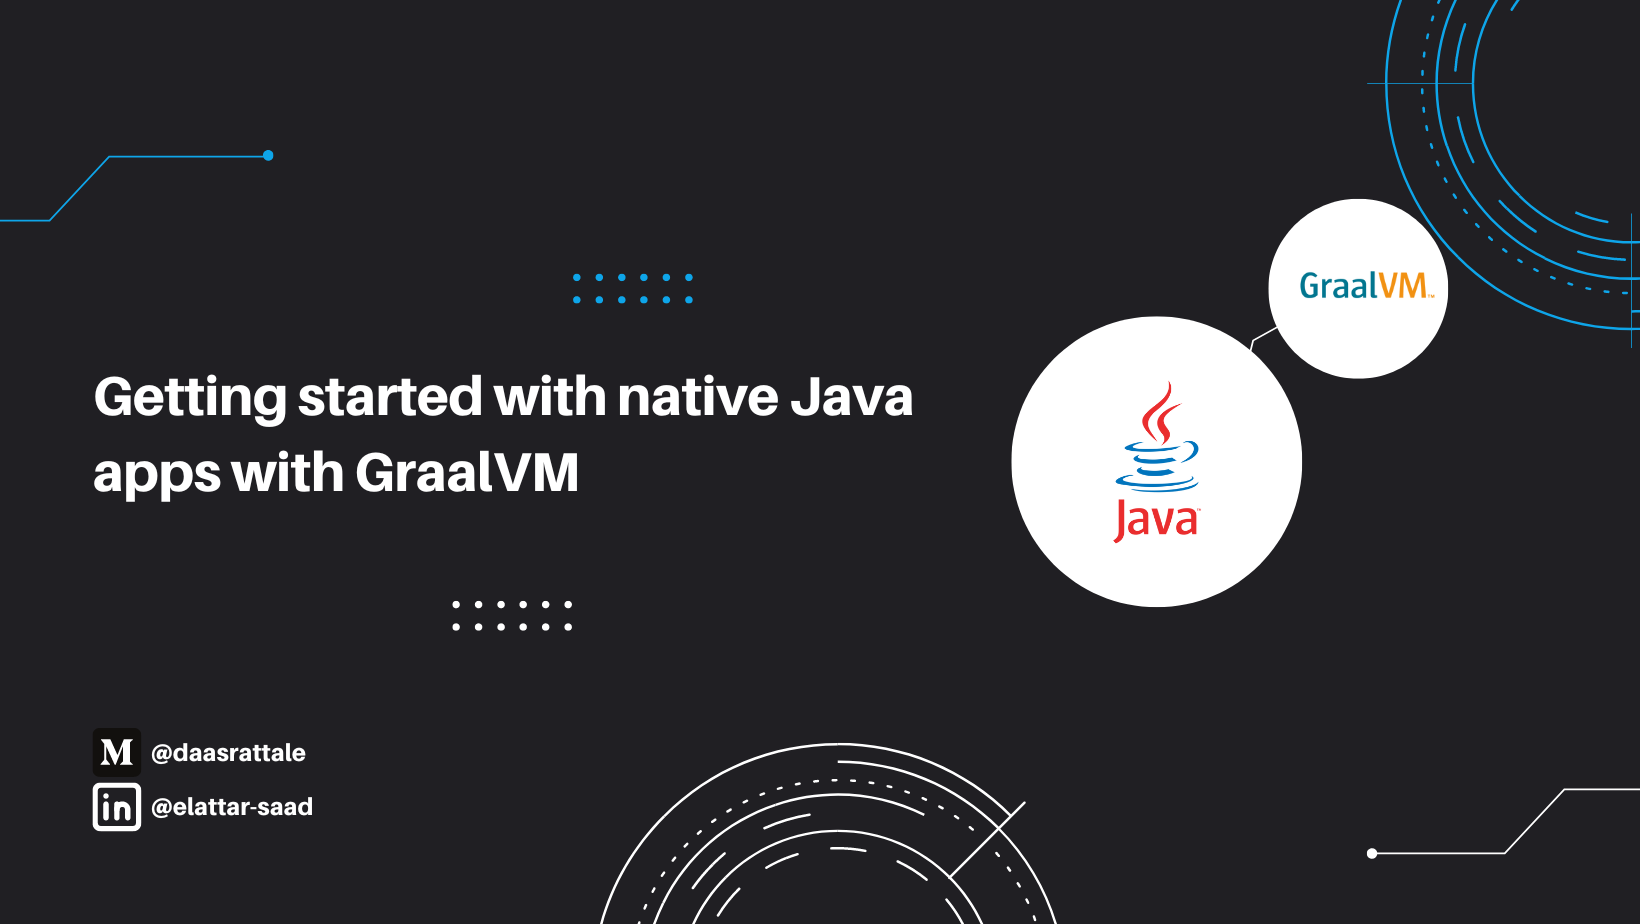 Getting started with native java apps with GraalVM